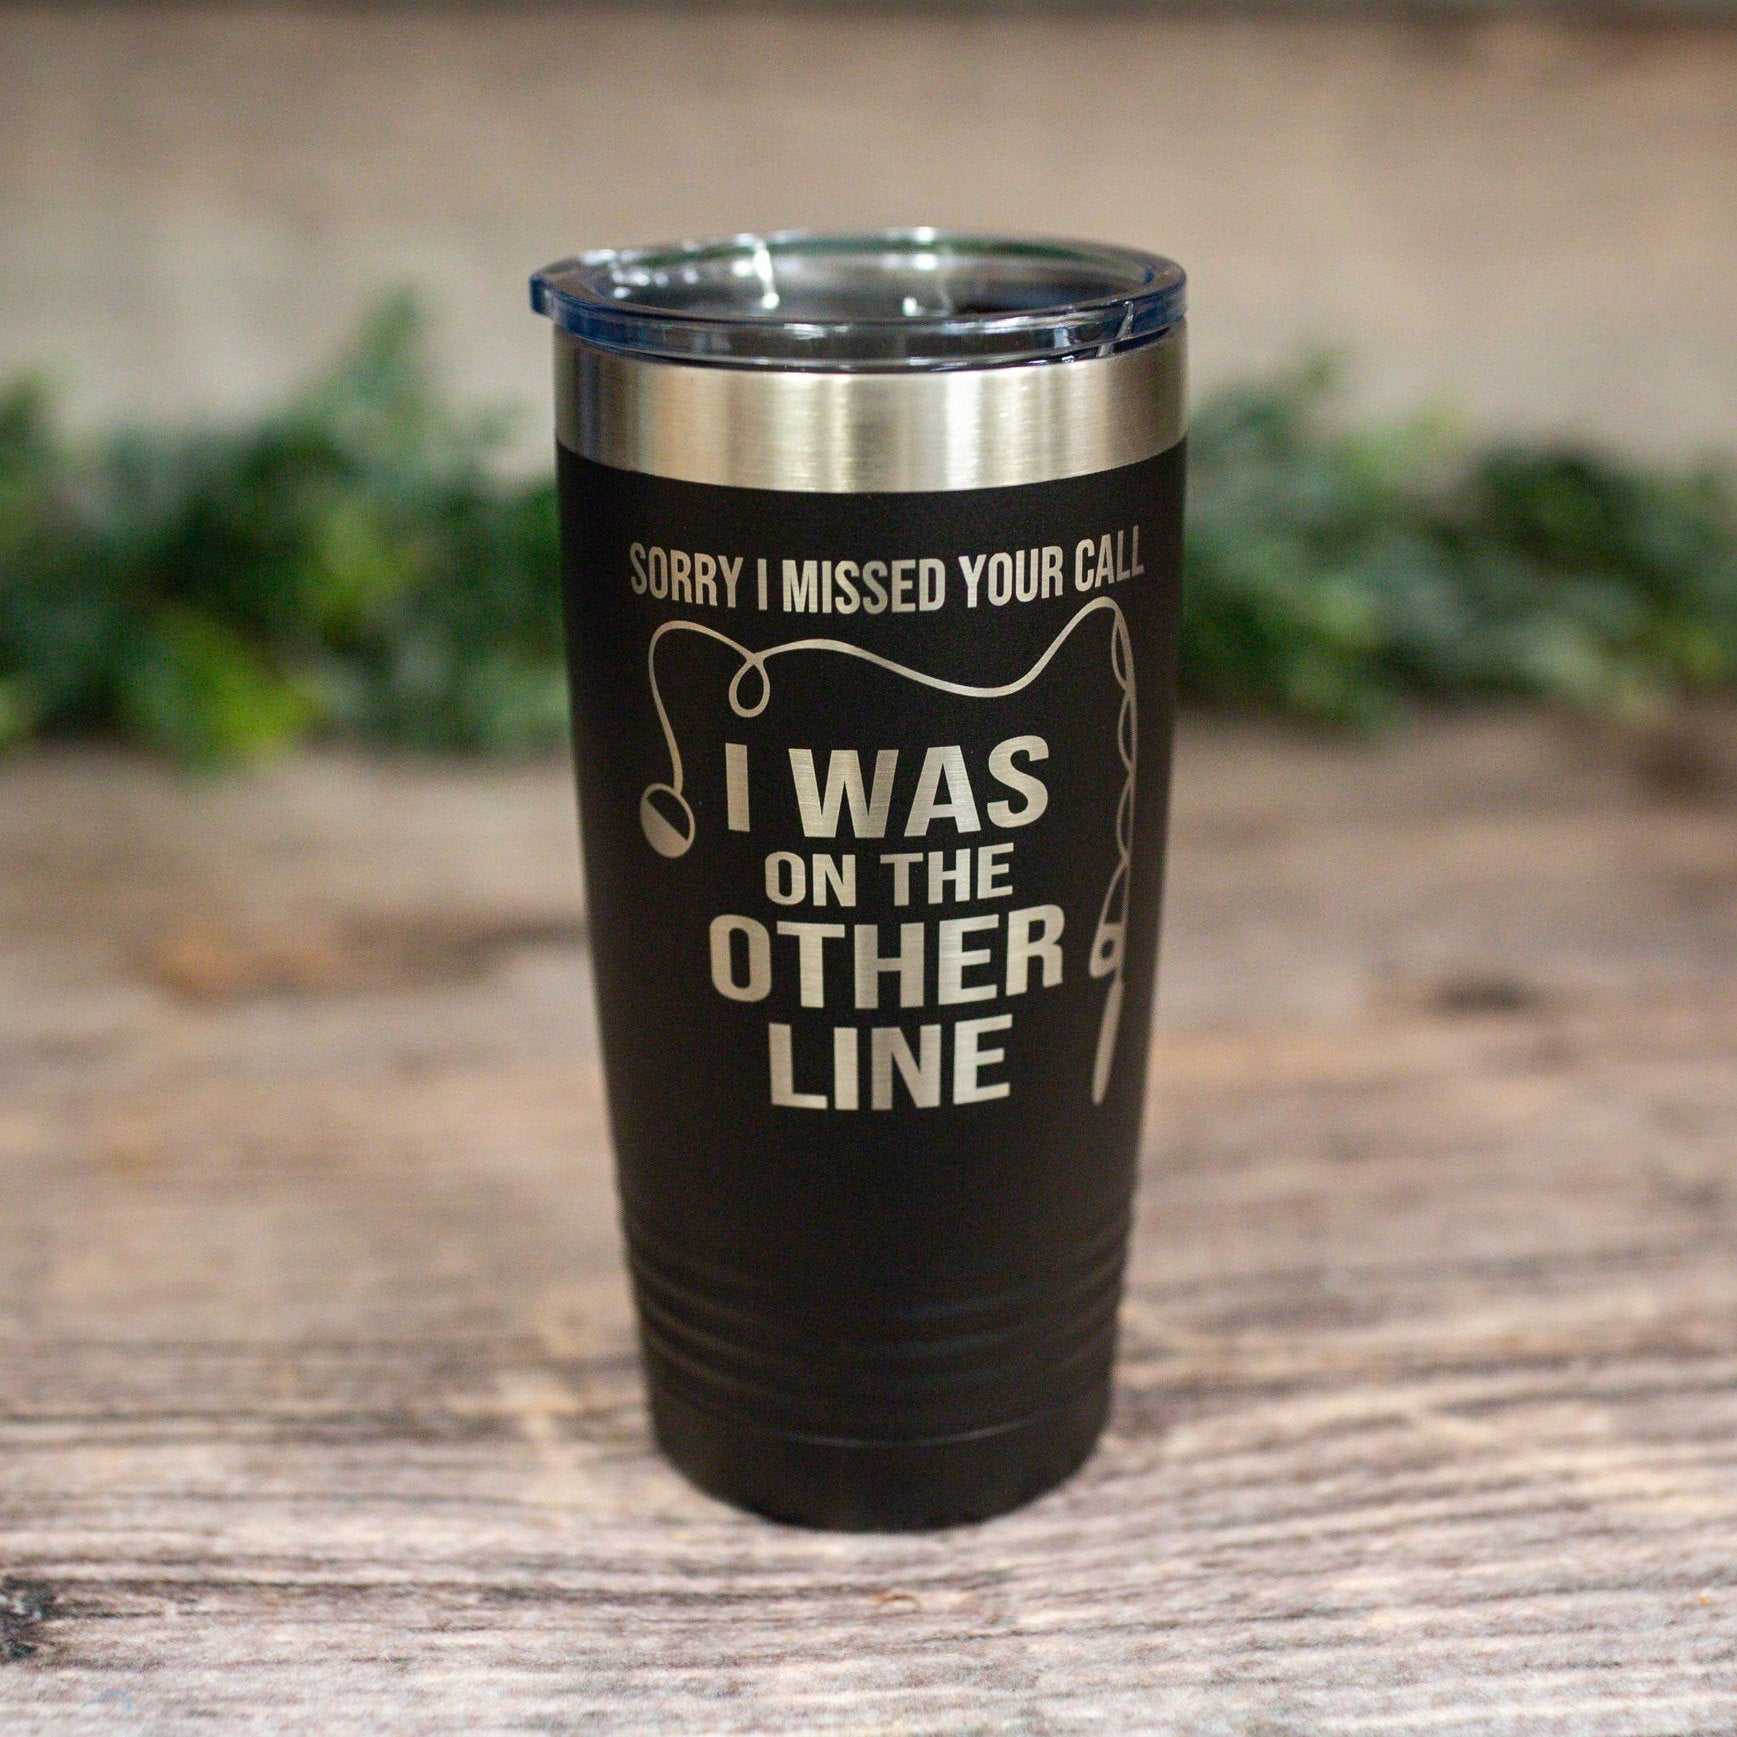 https://3cetching.com/wp-content/uploads/2021/07/sorry-i-missed-your-call-i-was-on-the-other-line-engraved-stainless-steel-tumbler-stainless-cup-gifts-for-him-60f7376b.jpg